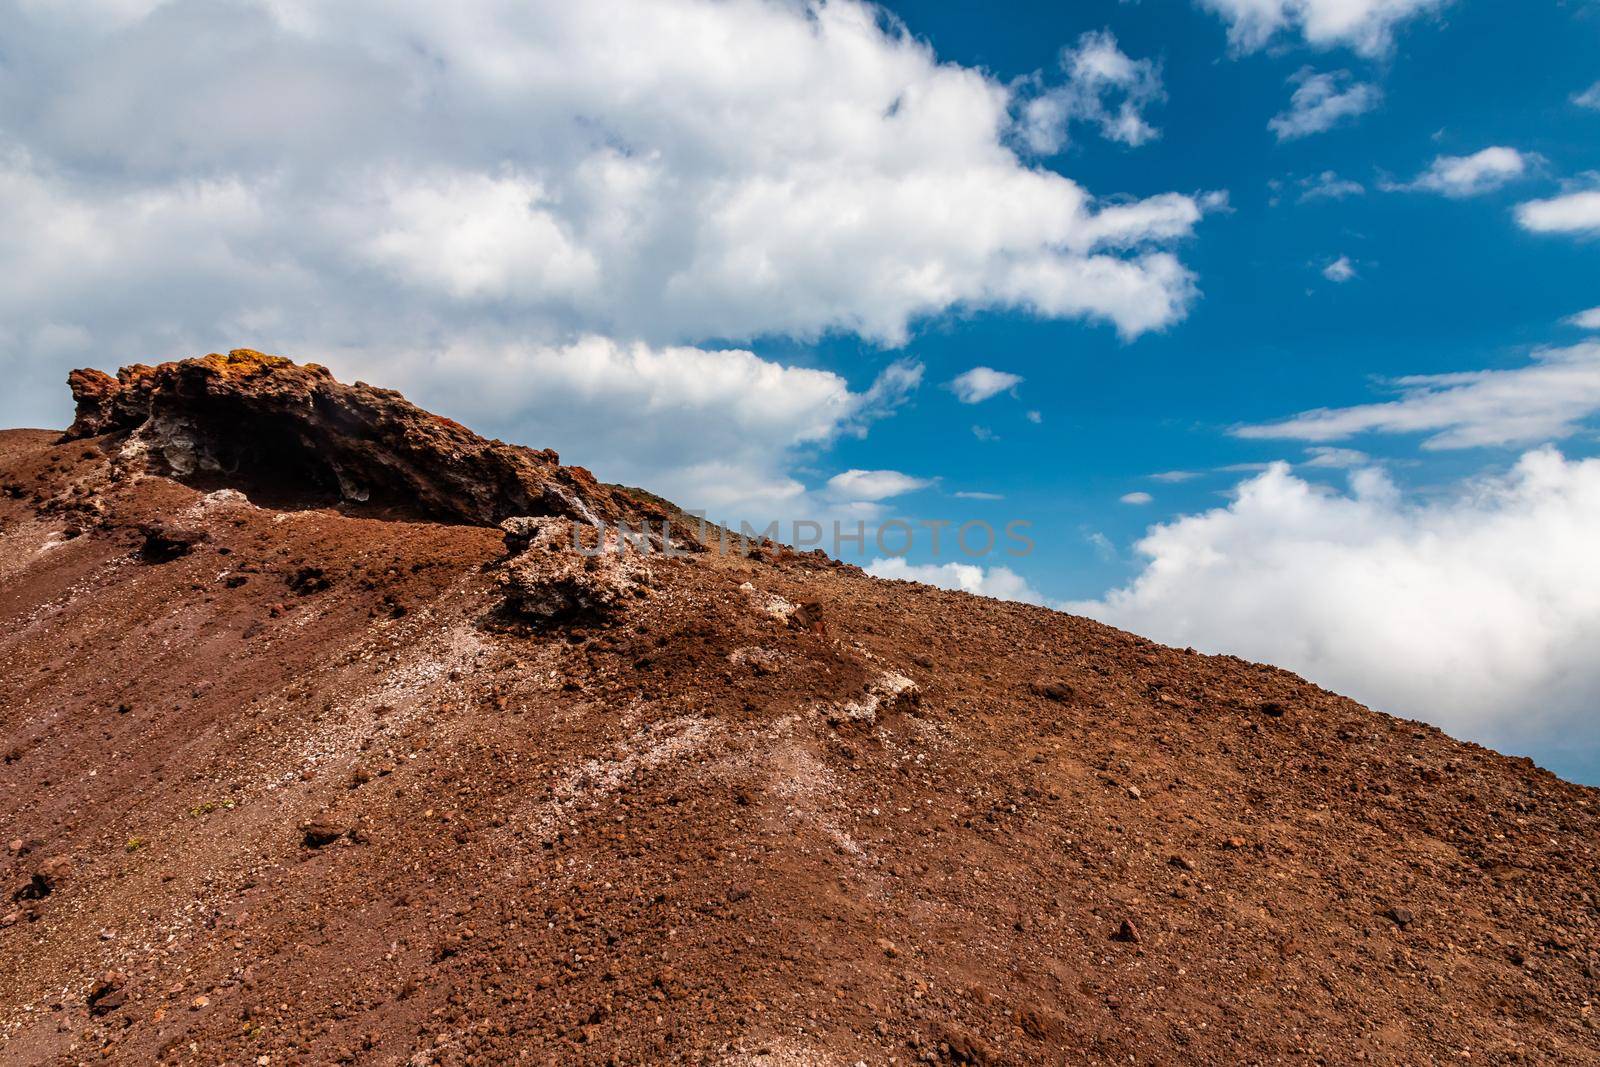 Mount Etna volcanic landscape and its typical vegetation, Sicily by mauricallari